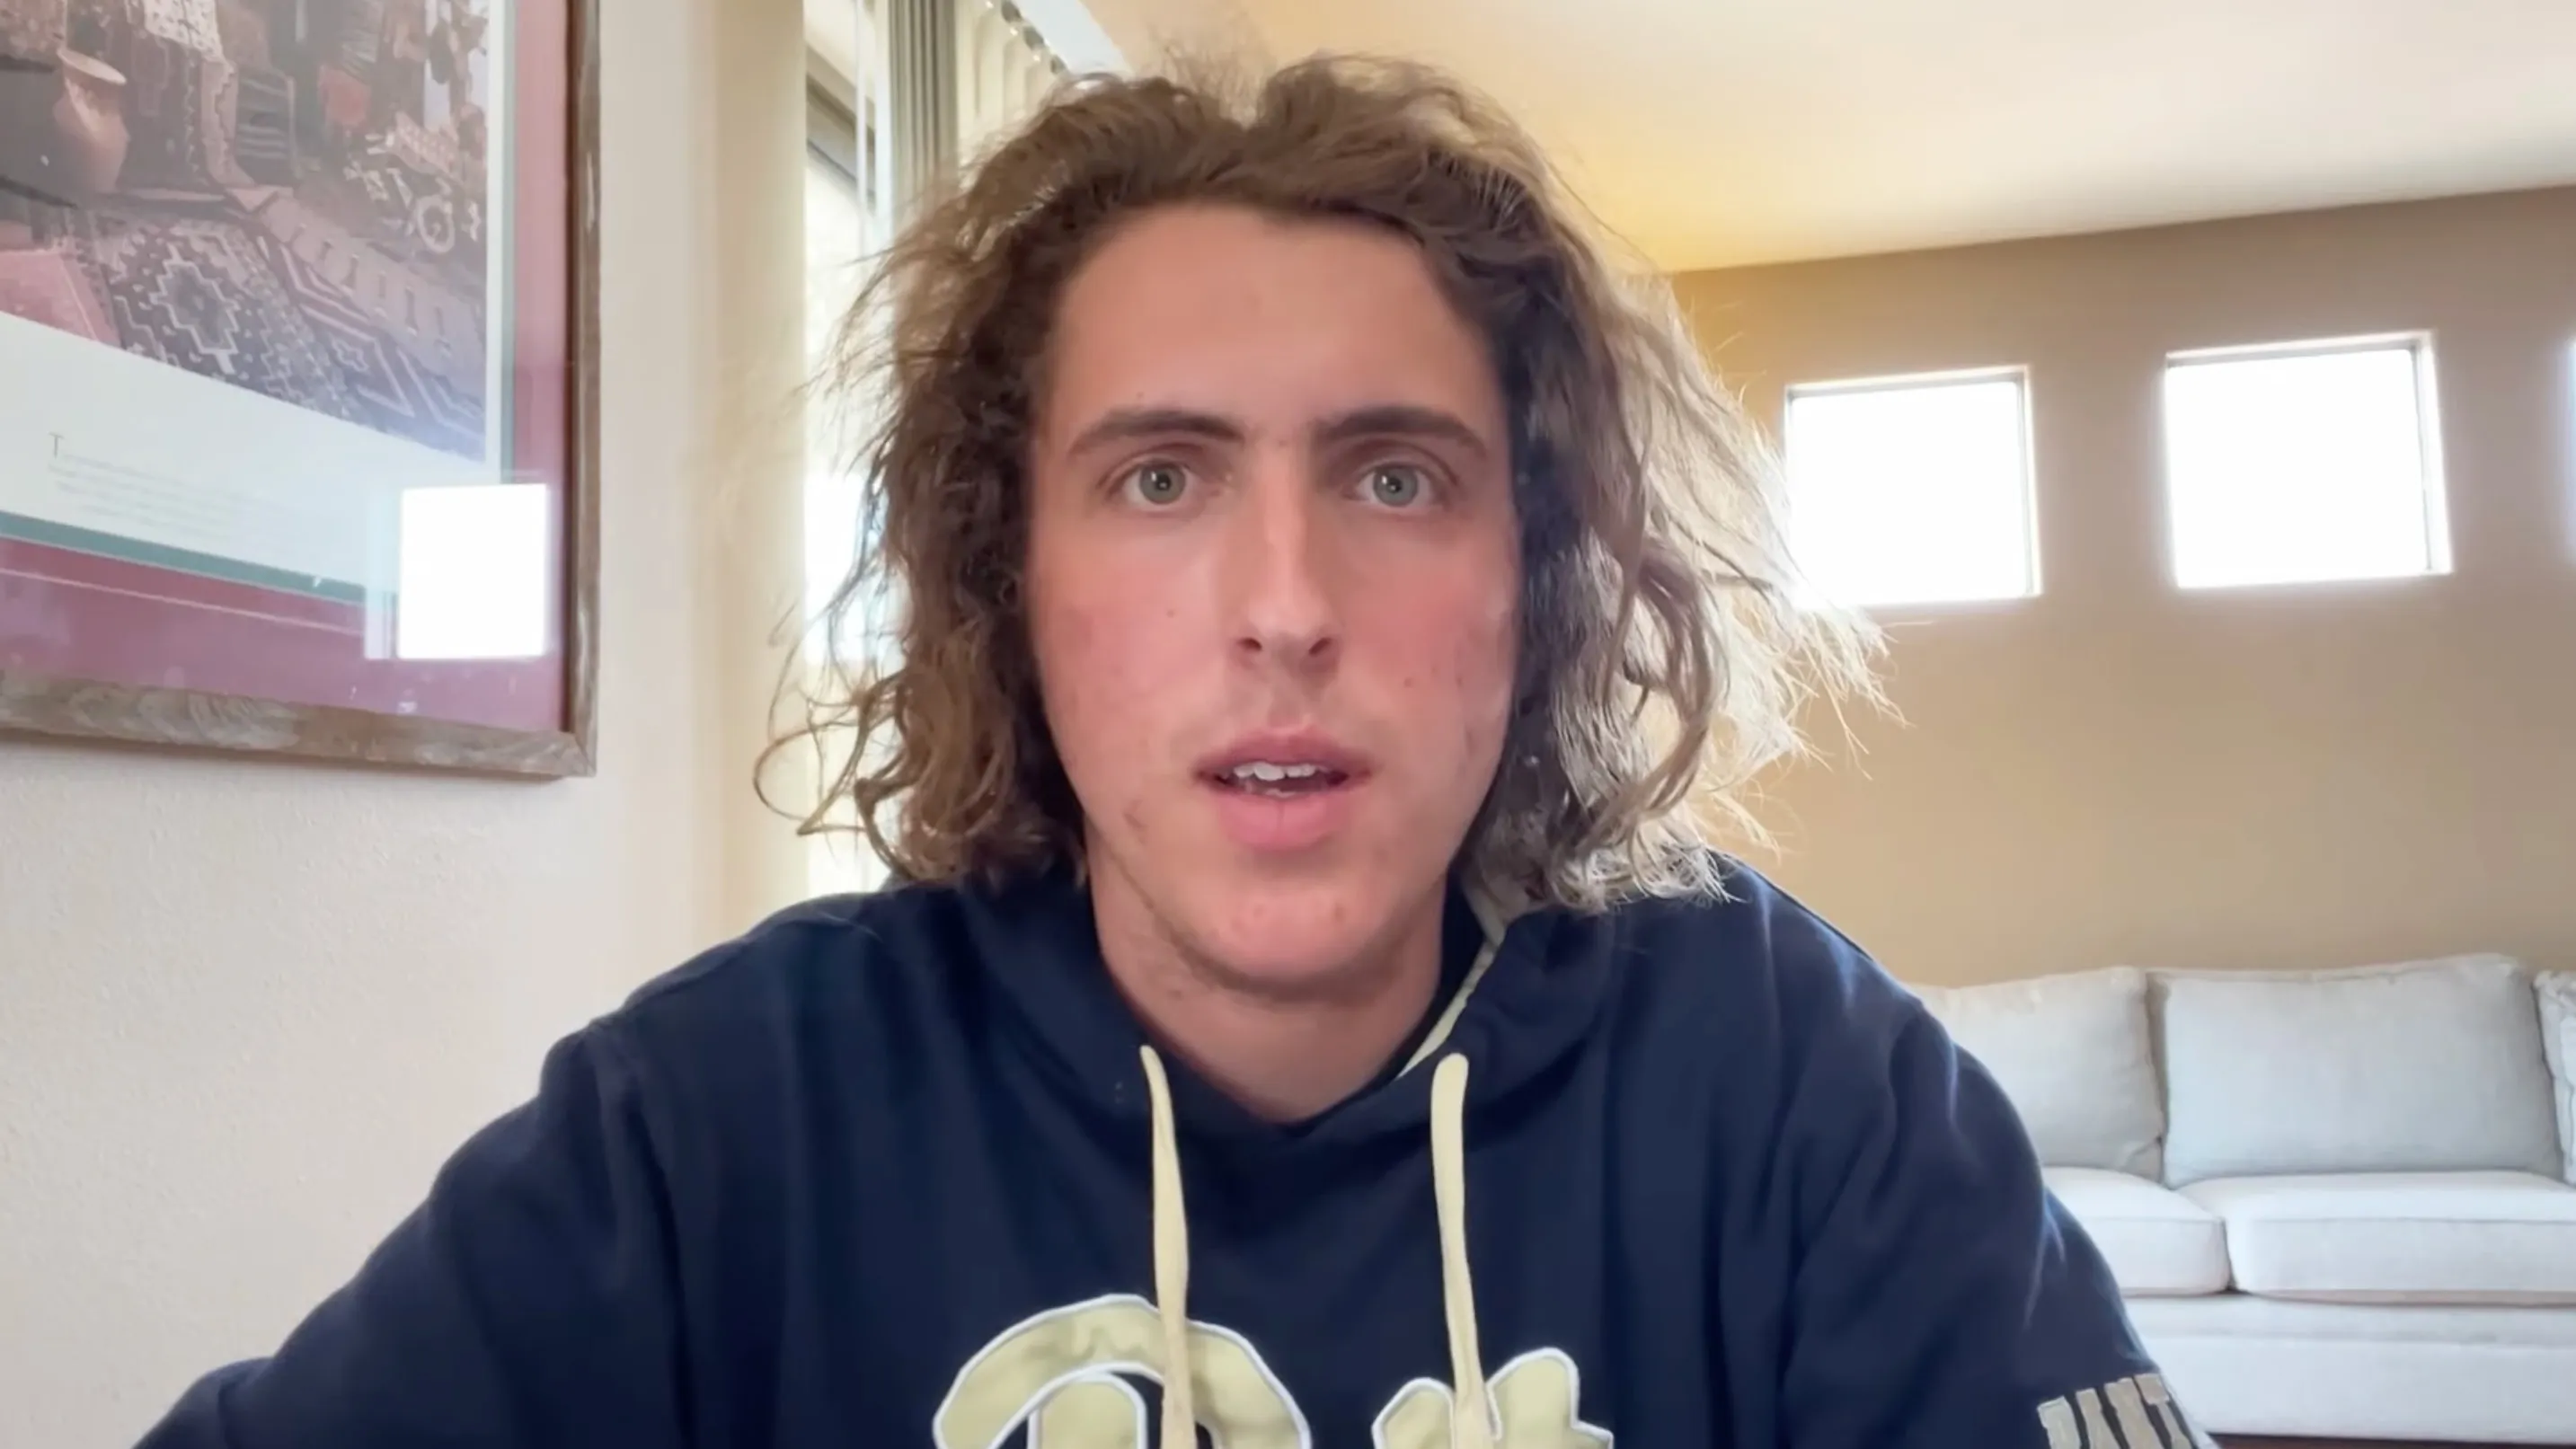 YouTuber Andrew Callaghan Addresses Allegations, Vows To Start Therapy